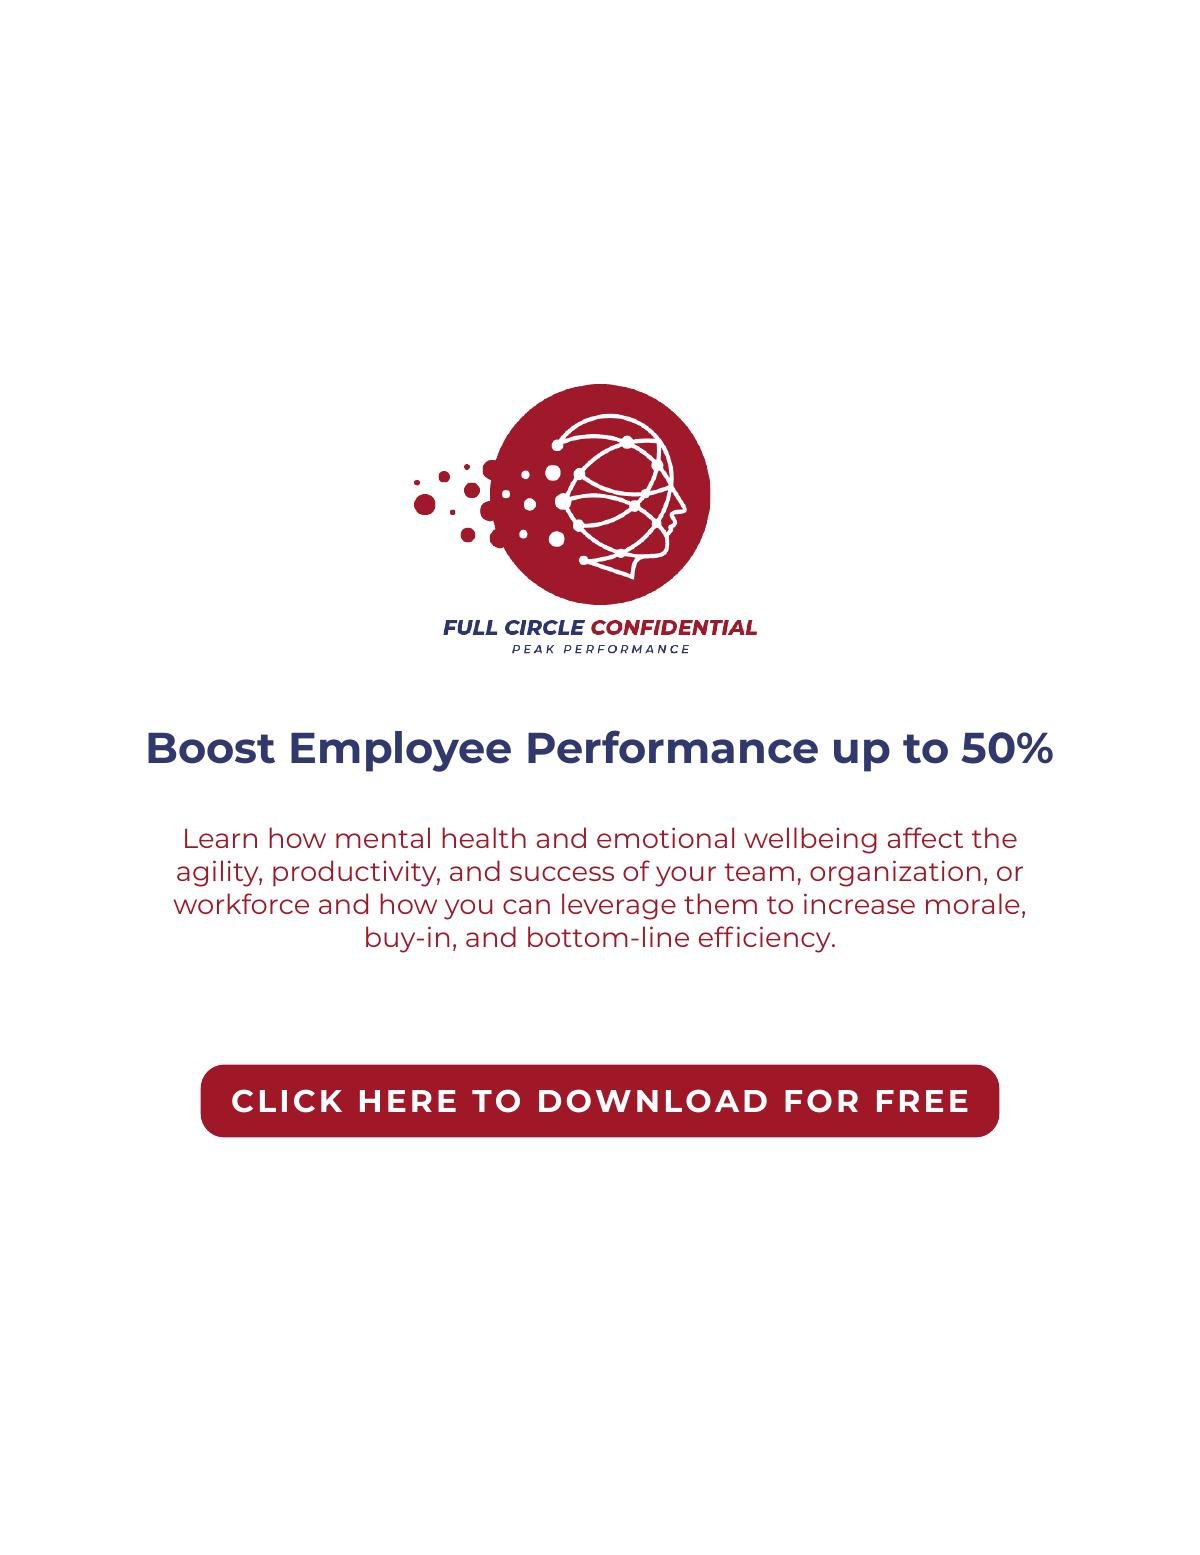 Boost Employee Performance up to 50%